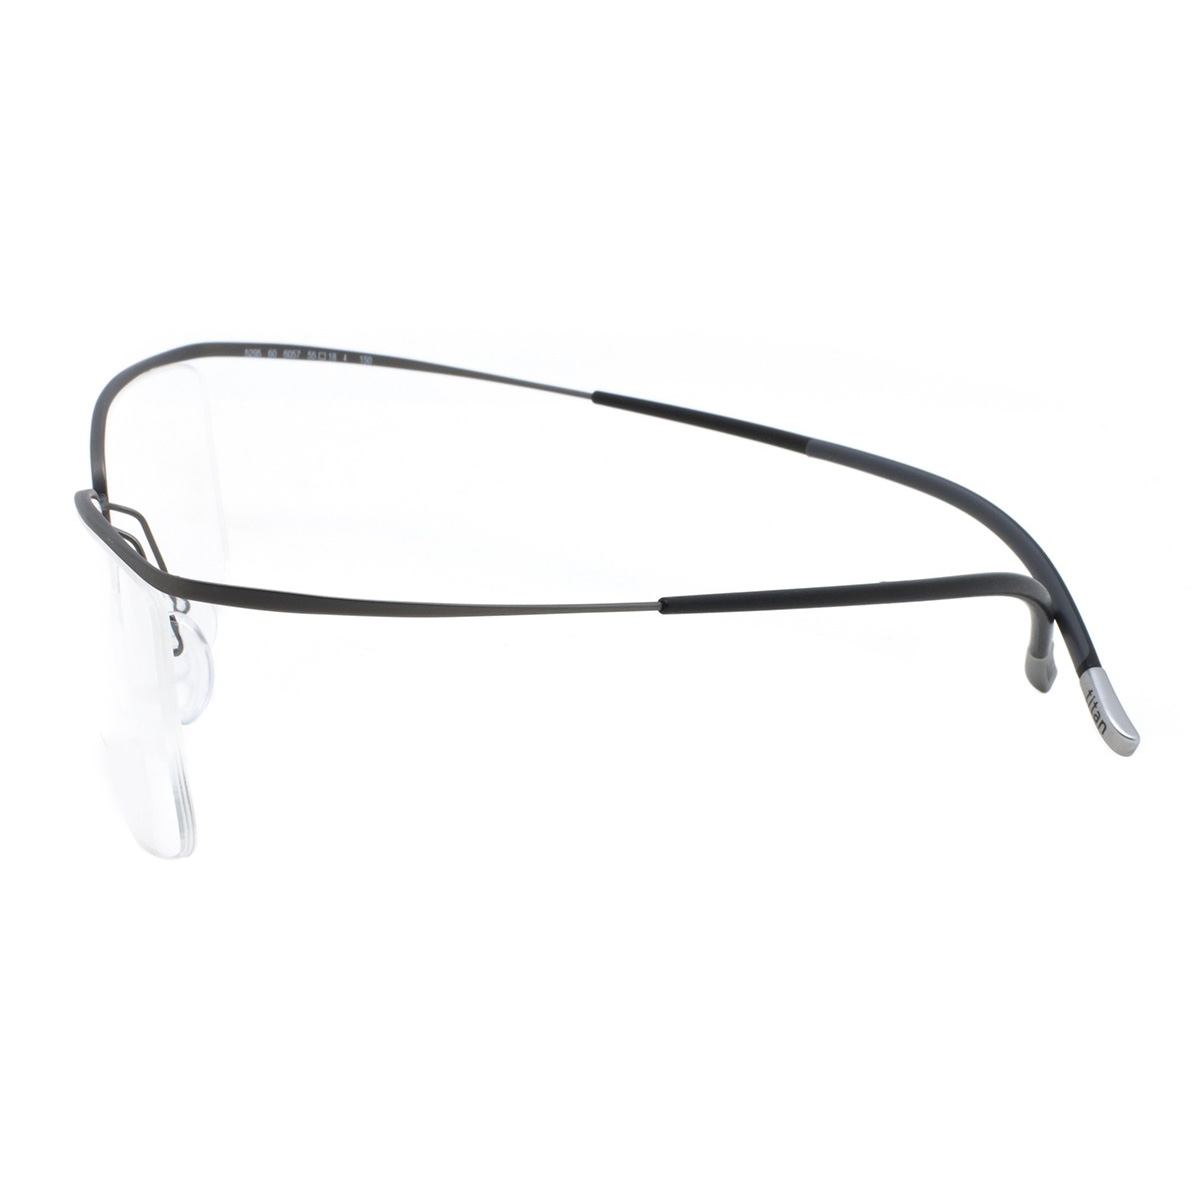  FBL Semi-Rimless Color Tinted Clear Arm Eyeglasses